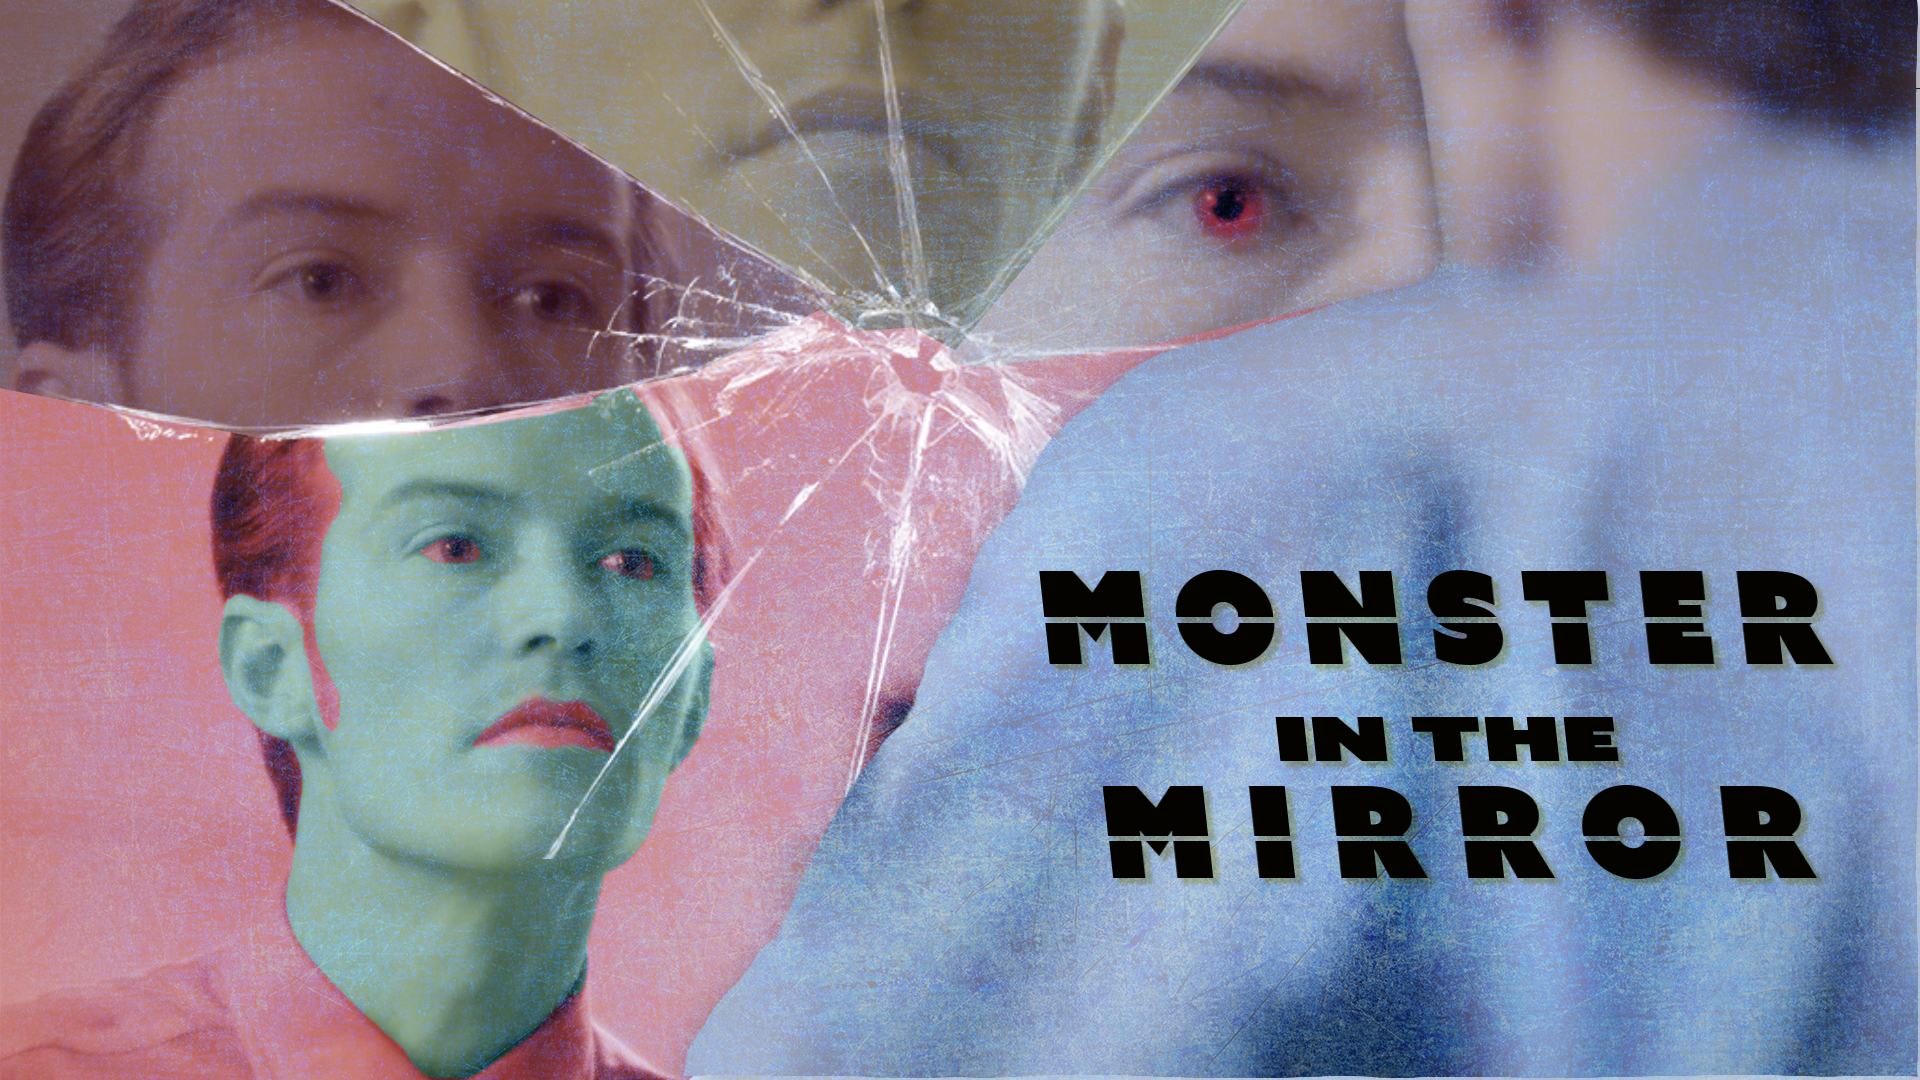 Monster in the Mirror: Overview